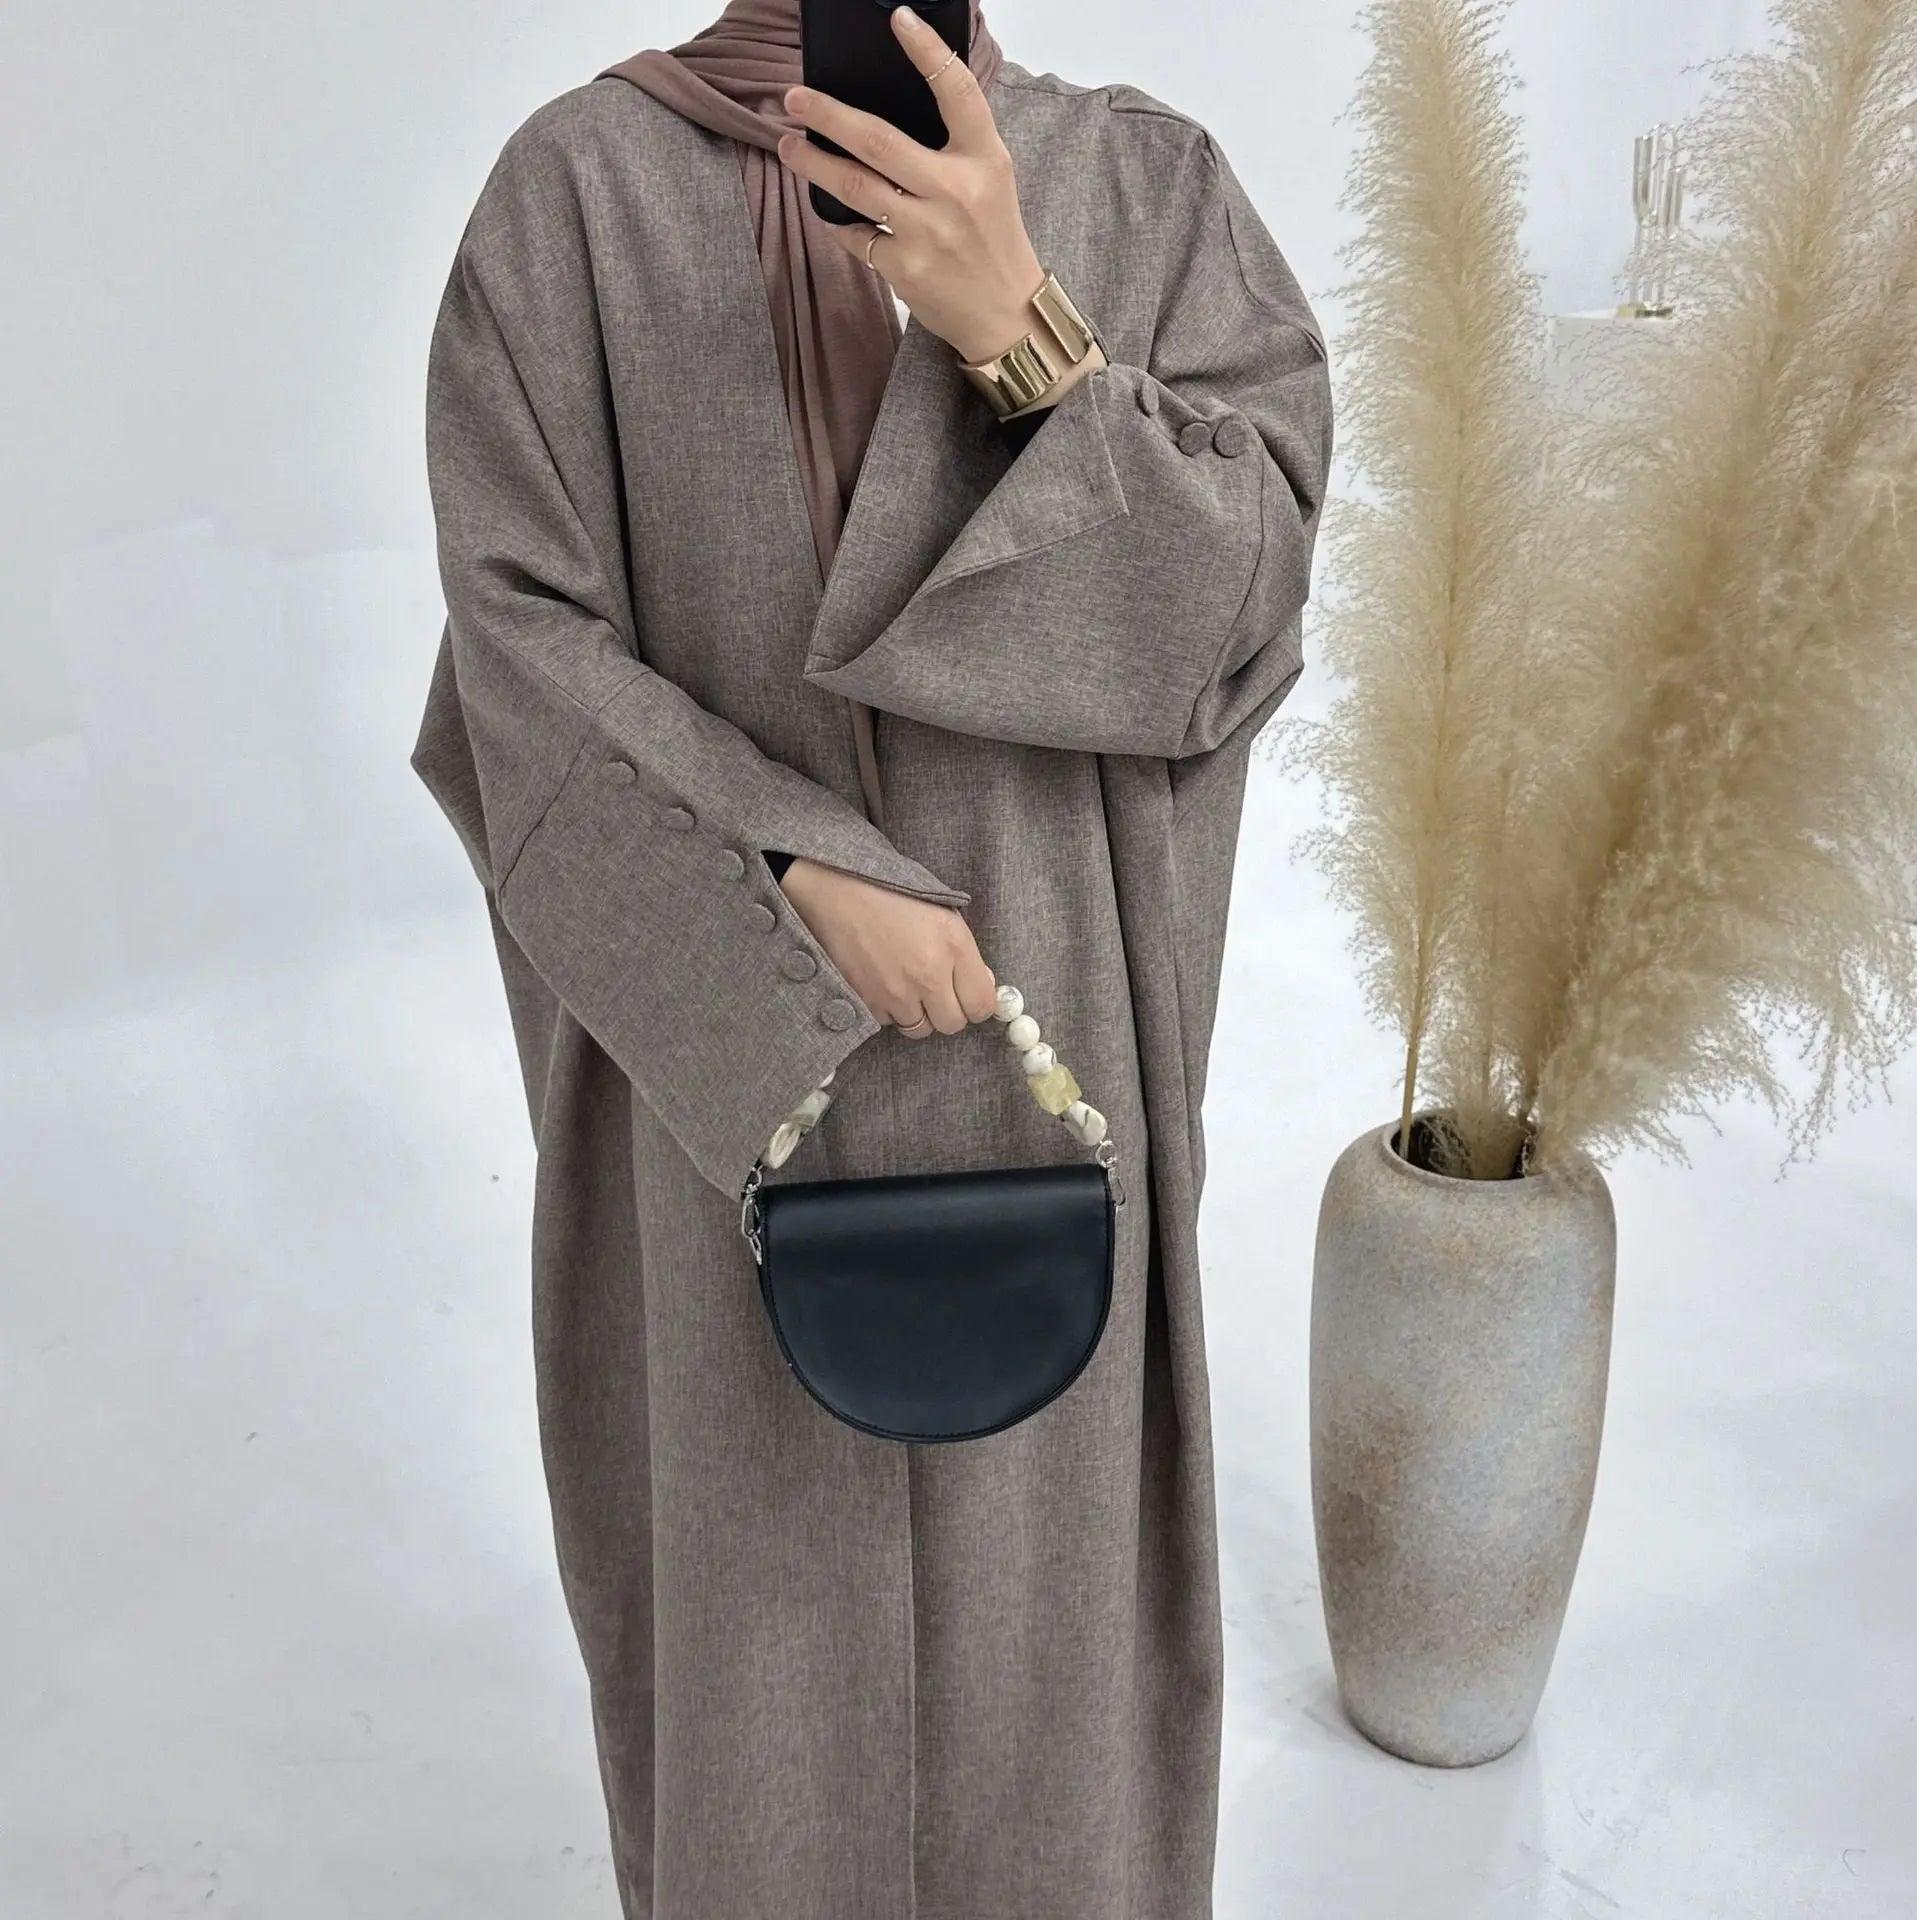 MOA042 Linen Cardigan Open Abaya Dress With belt - Mariam's Collection